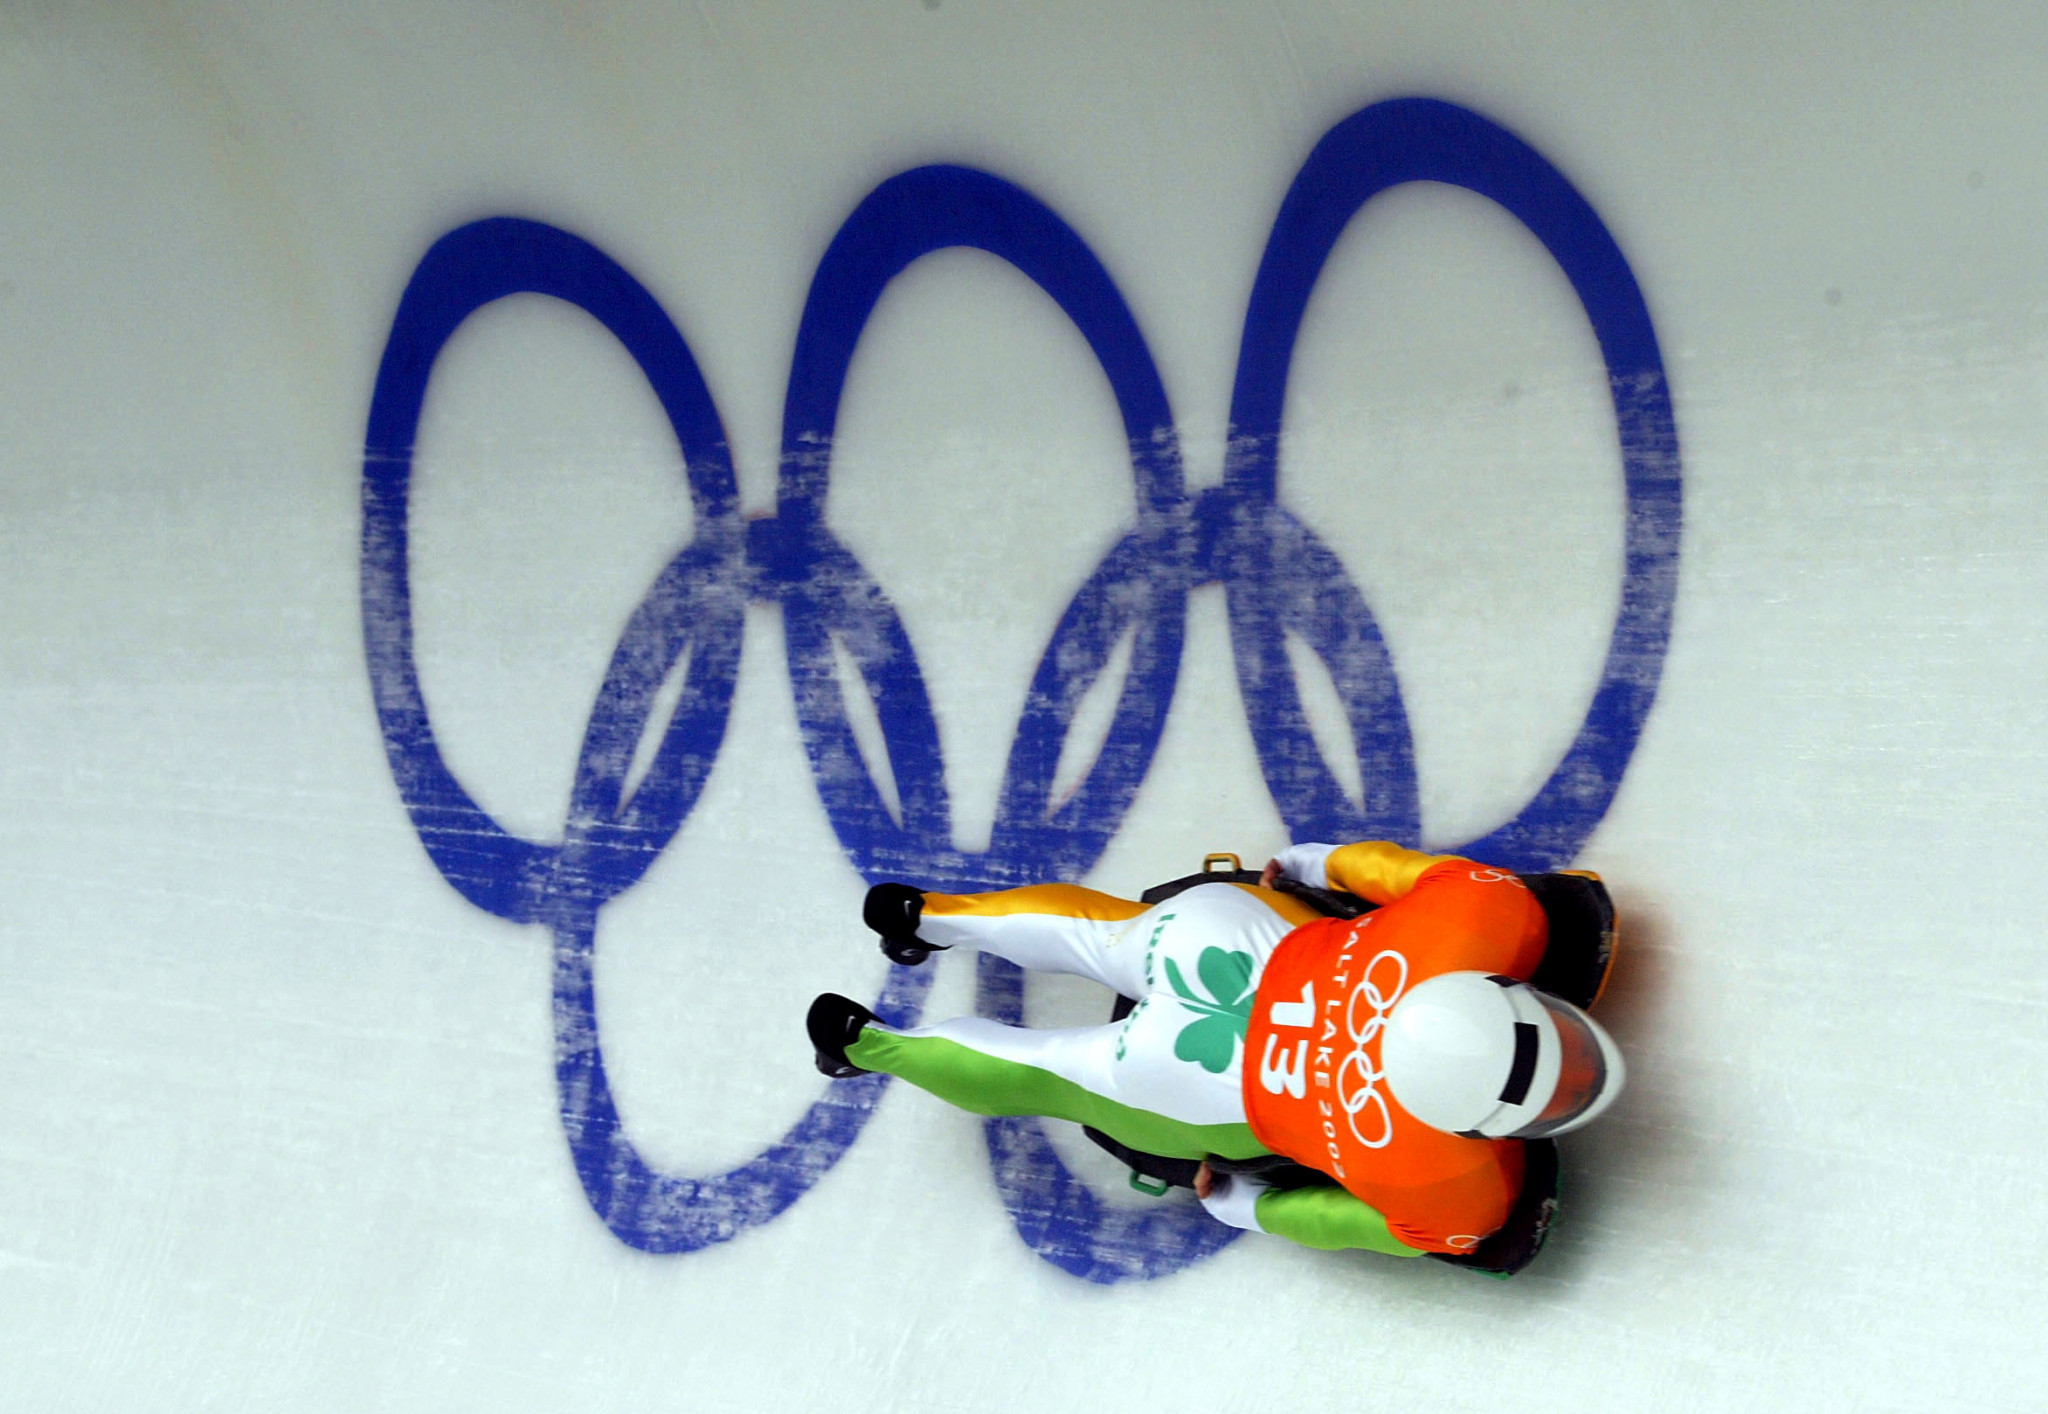 Clifton Wrottesley's fourth place in the  skeleton at Salt Lake City 2002 remains Ireland's best Winter Olympic result ©Getty Images